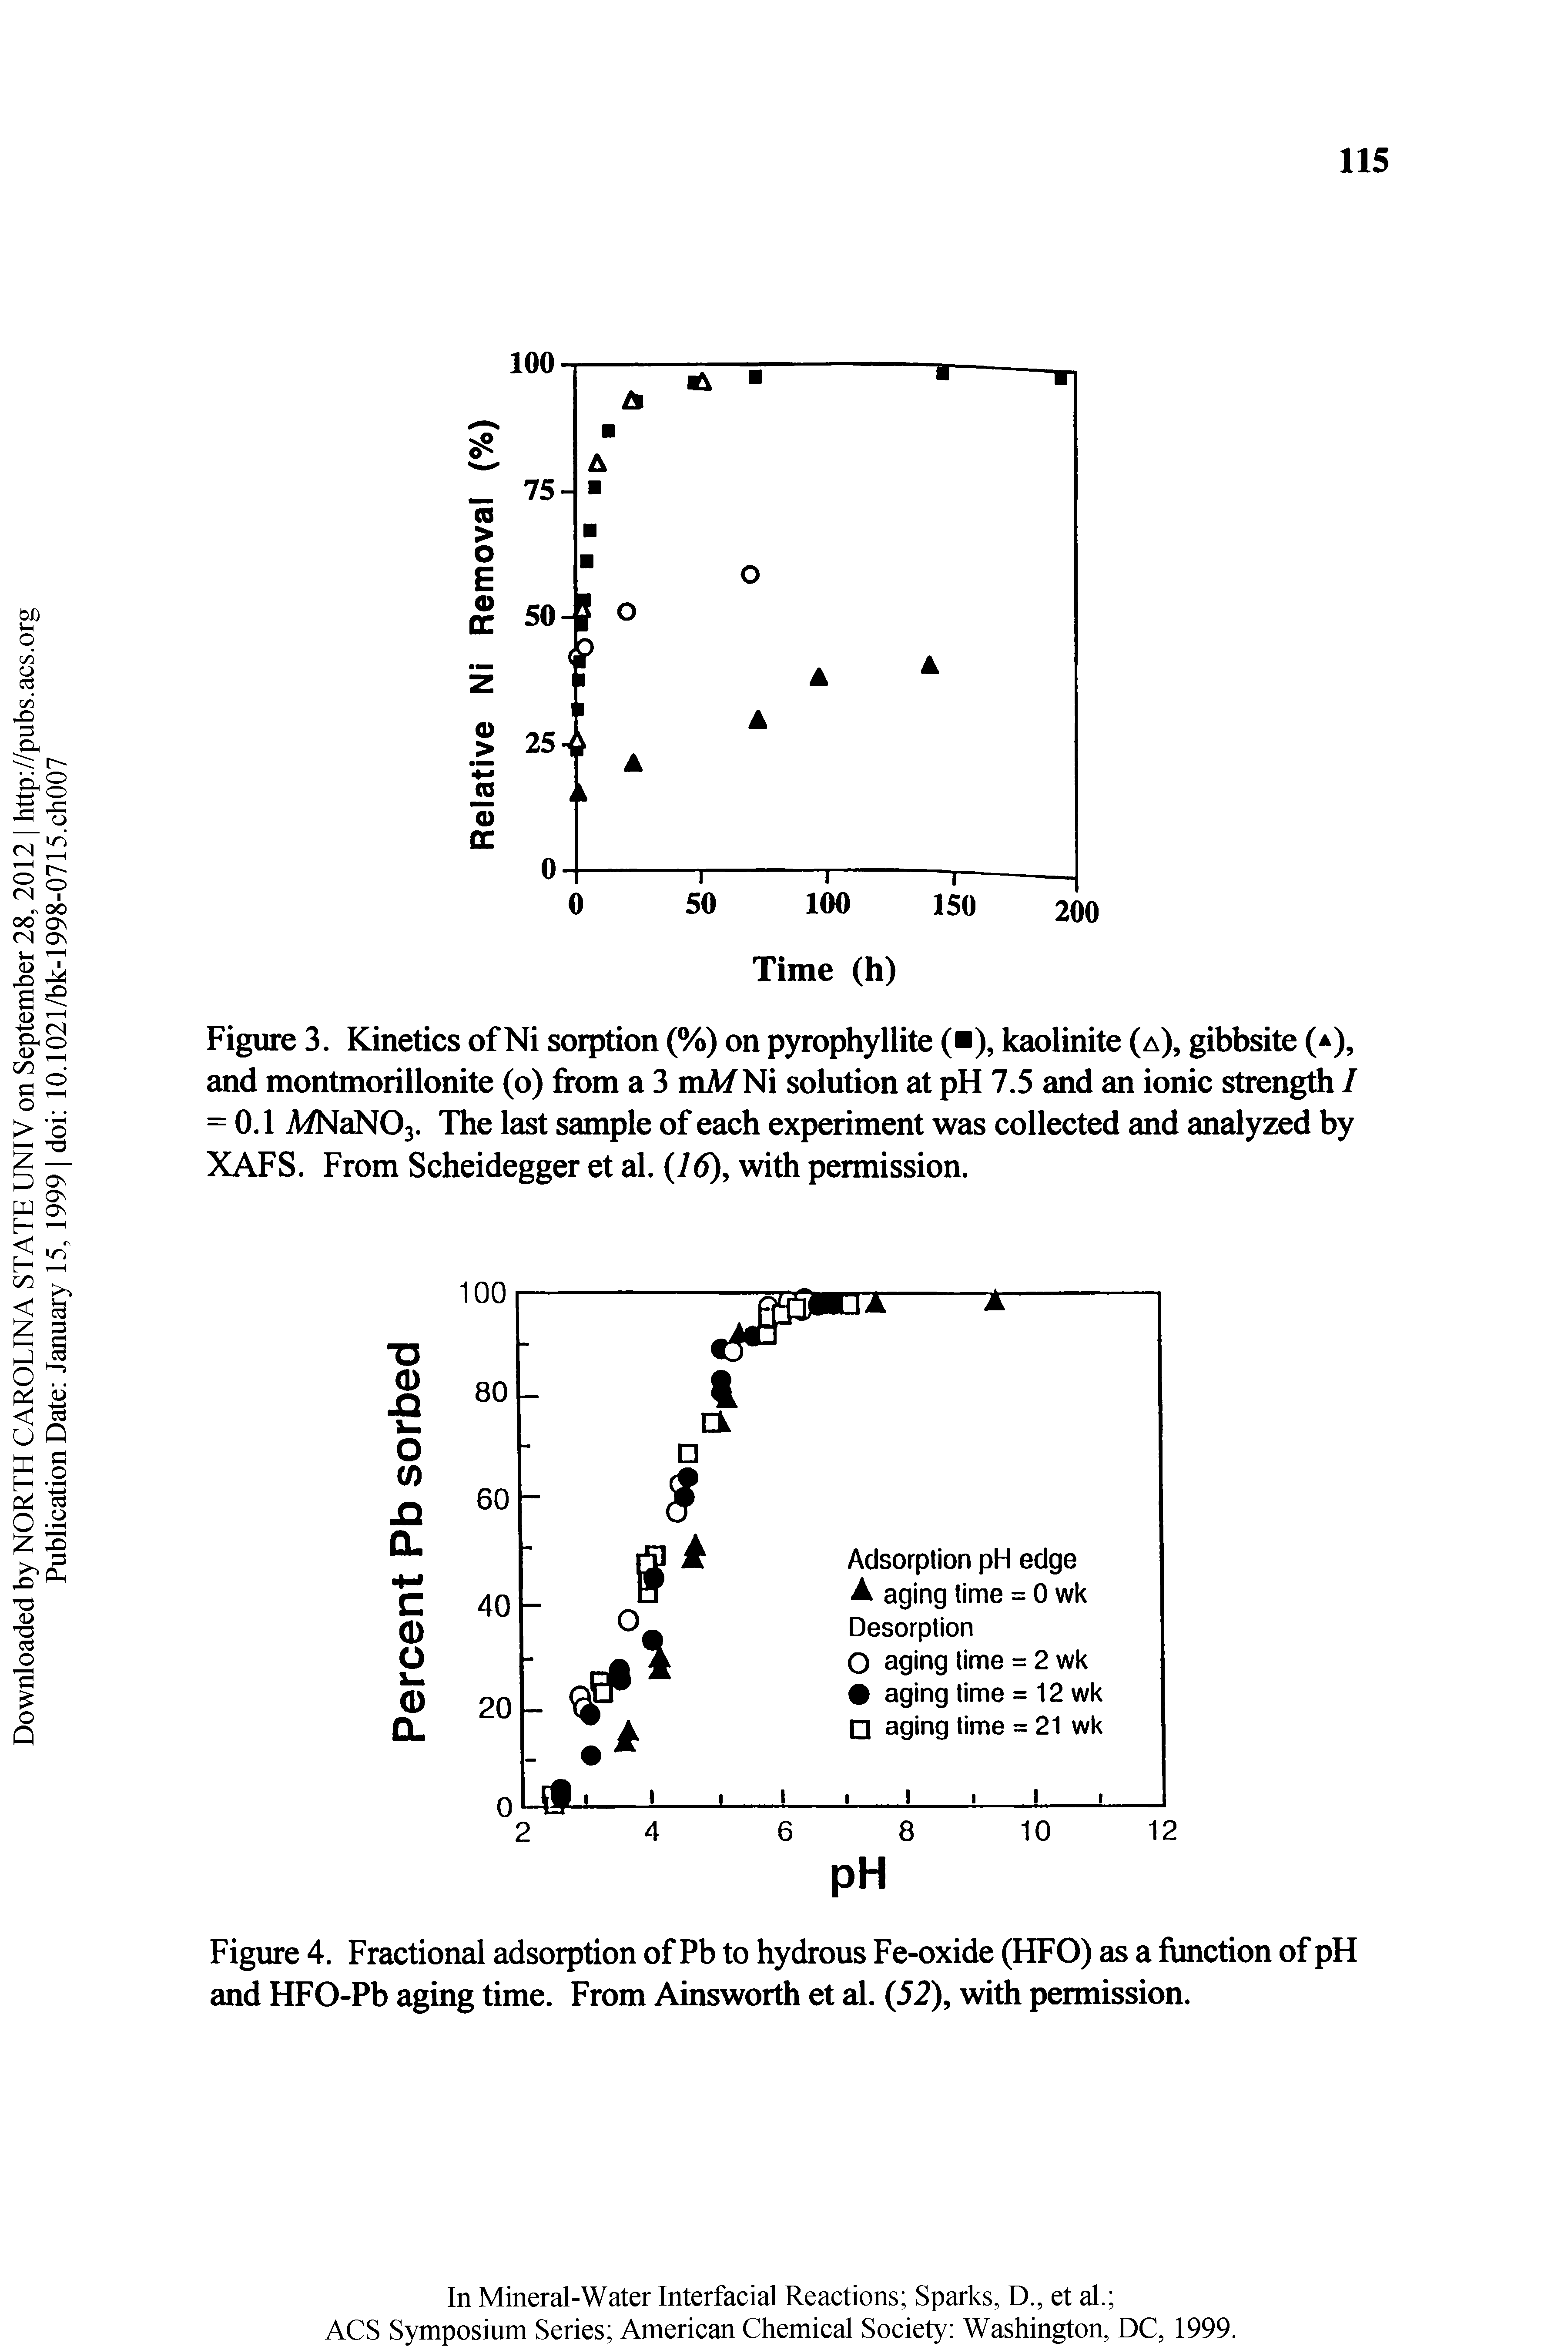 Figure 4. Fractional adsorption of Pb to hydrous Fe-oxide (HFO) as a function of pH and HFO-Pb aging time. From Ainsworth et al. (52), with permission.